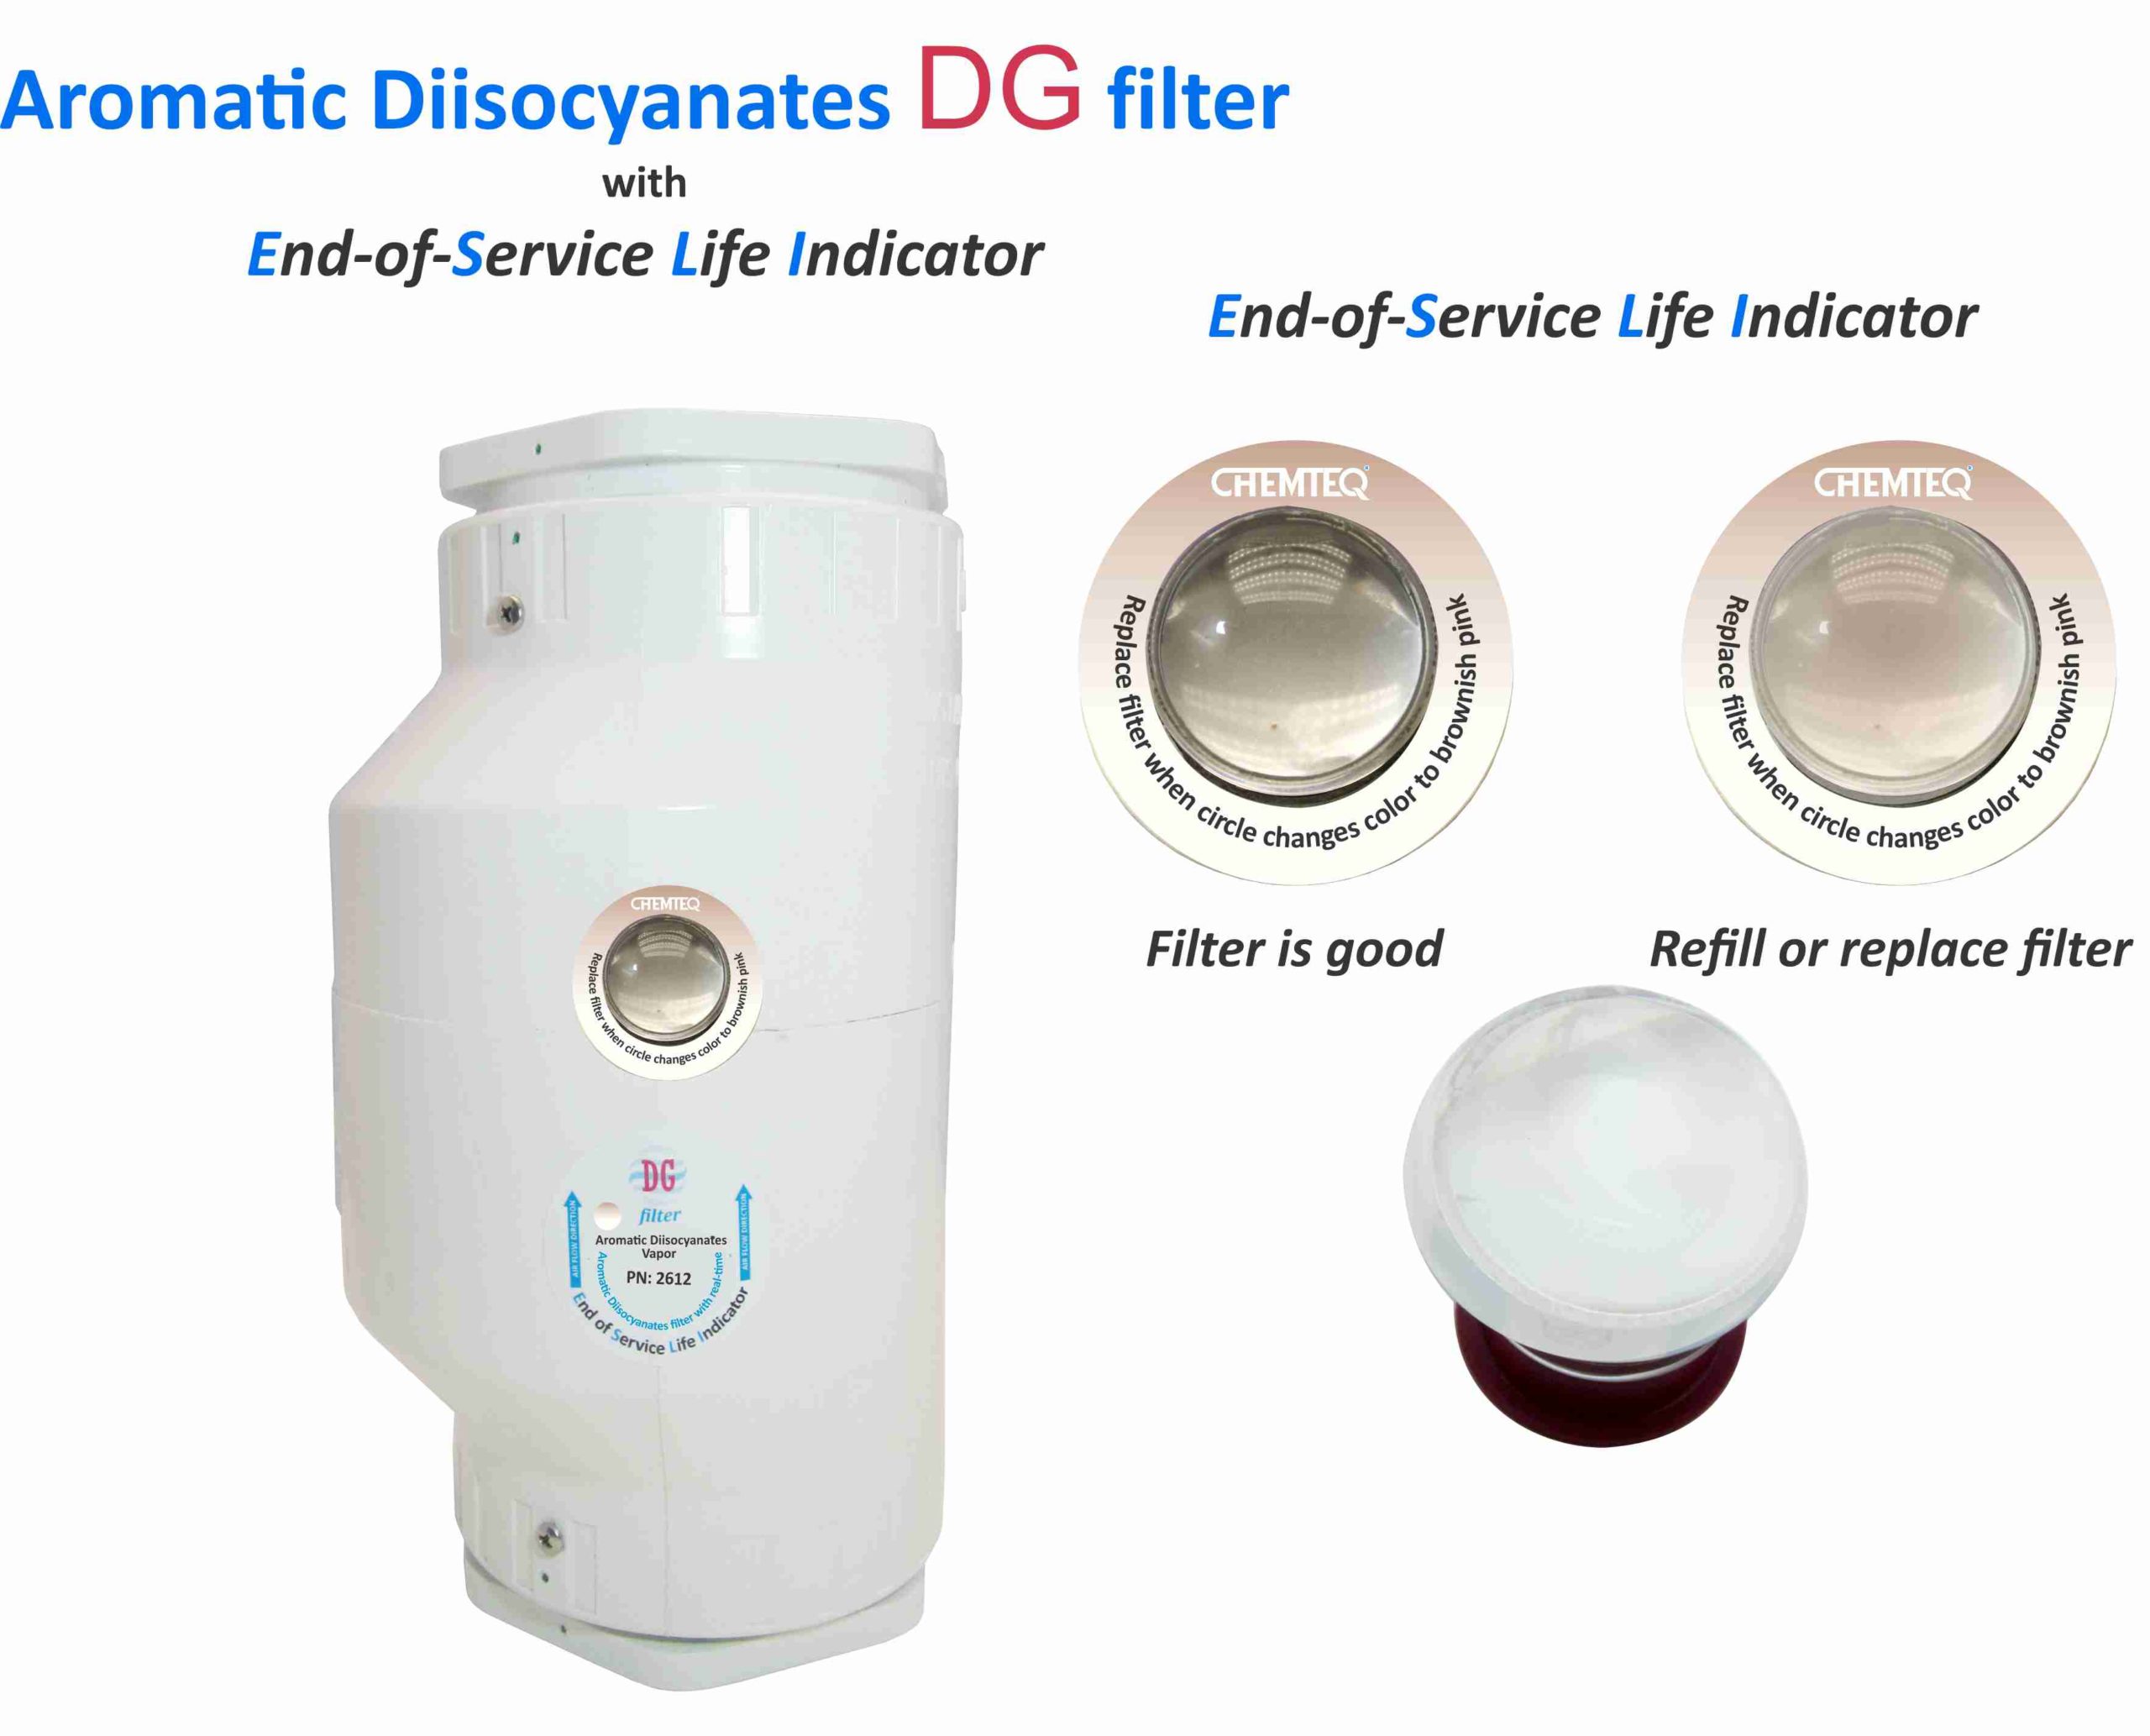 Aromatic Diisocyanates DG FILTER-ESLI-2612. Filter with end of service life indicator for chemical processes and reactor vents.